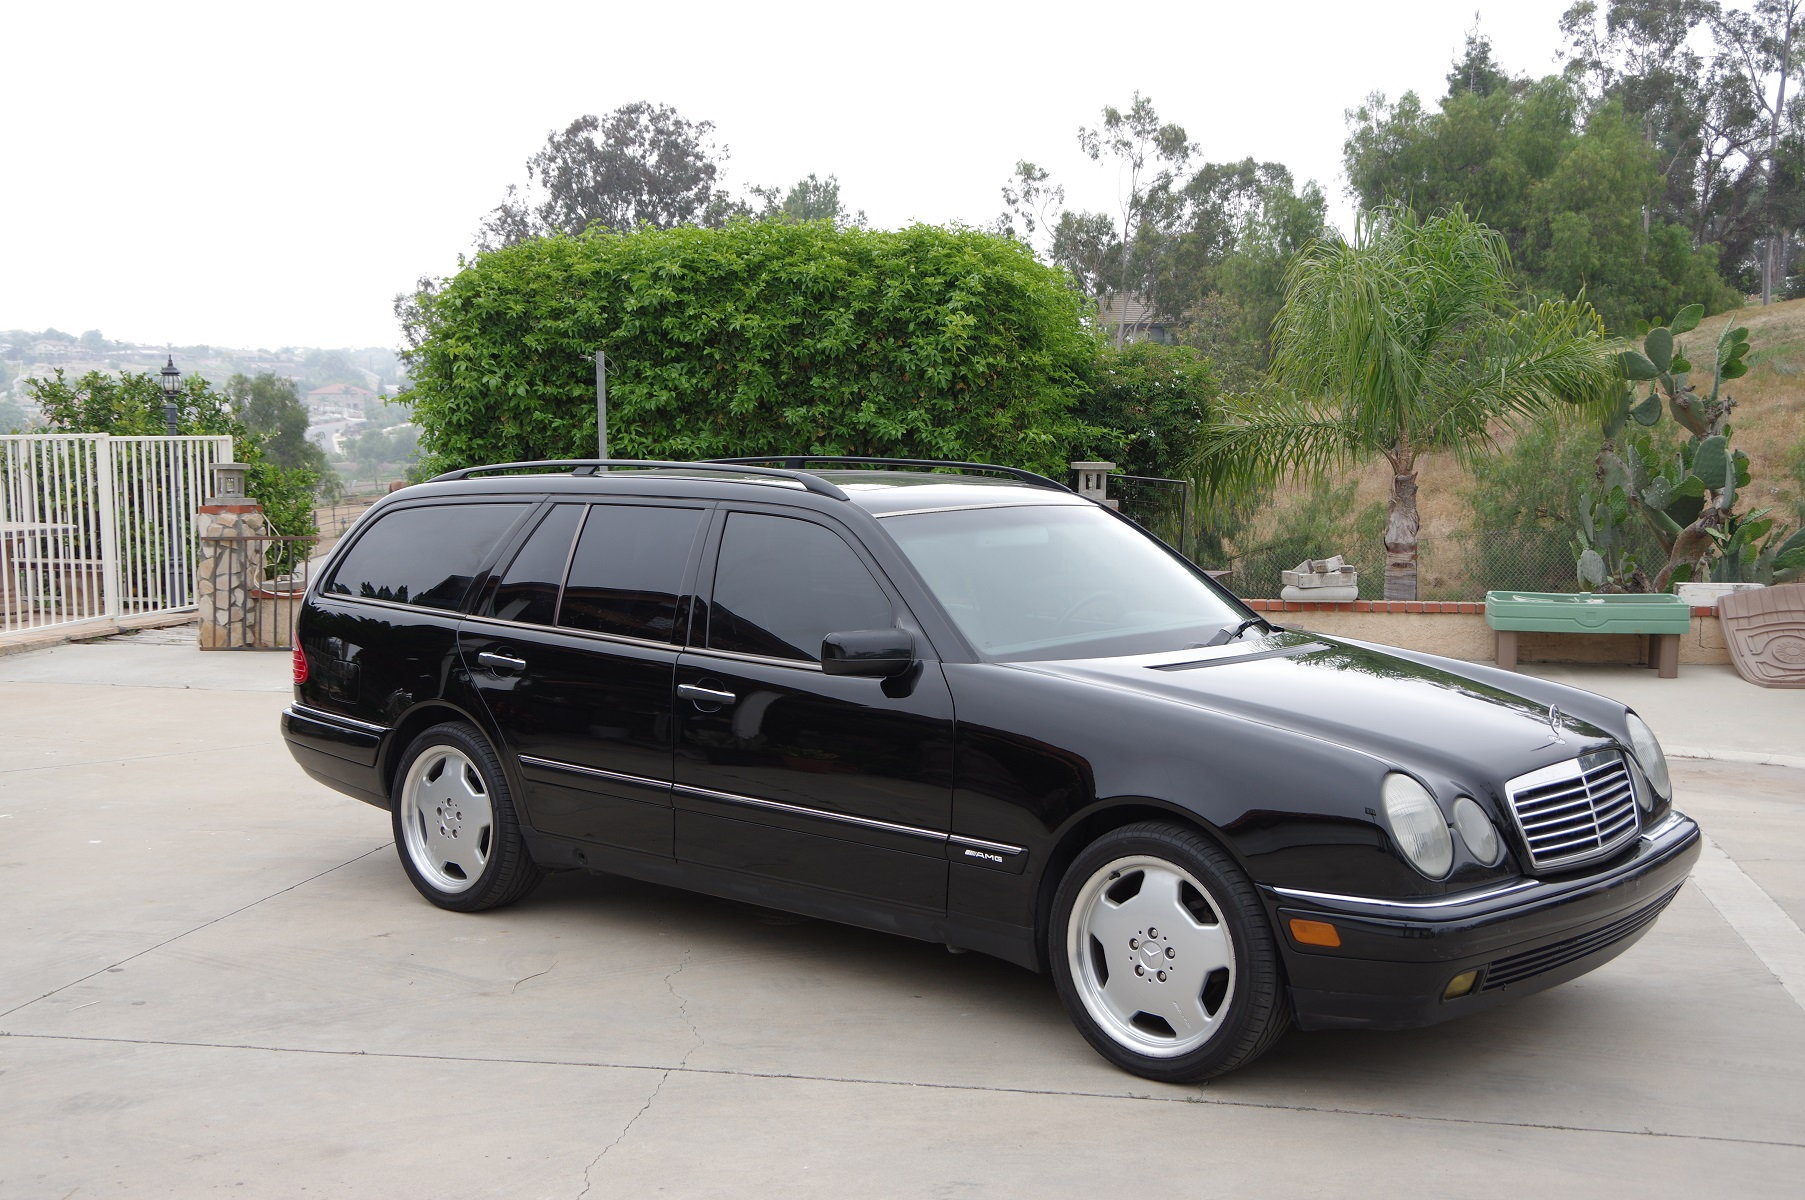 1999 Mercedes-Benz E320 - 1999 Mercedes Benz E320 Wagon Clean Title - Used - VIN WDBJH65F2XA746269 - 242,000 Miles - 6 cyl - 2WD - Automatic - Wagon - Black - Riverside, CA 92504, United States